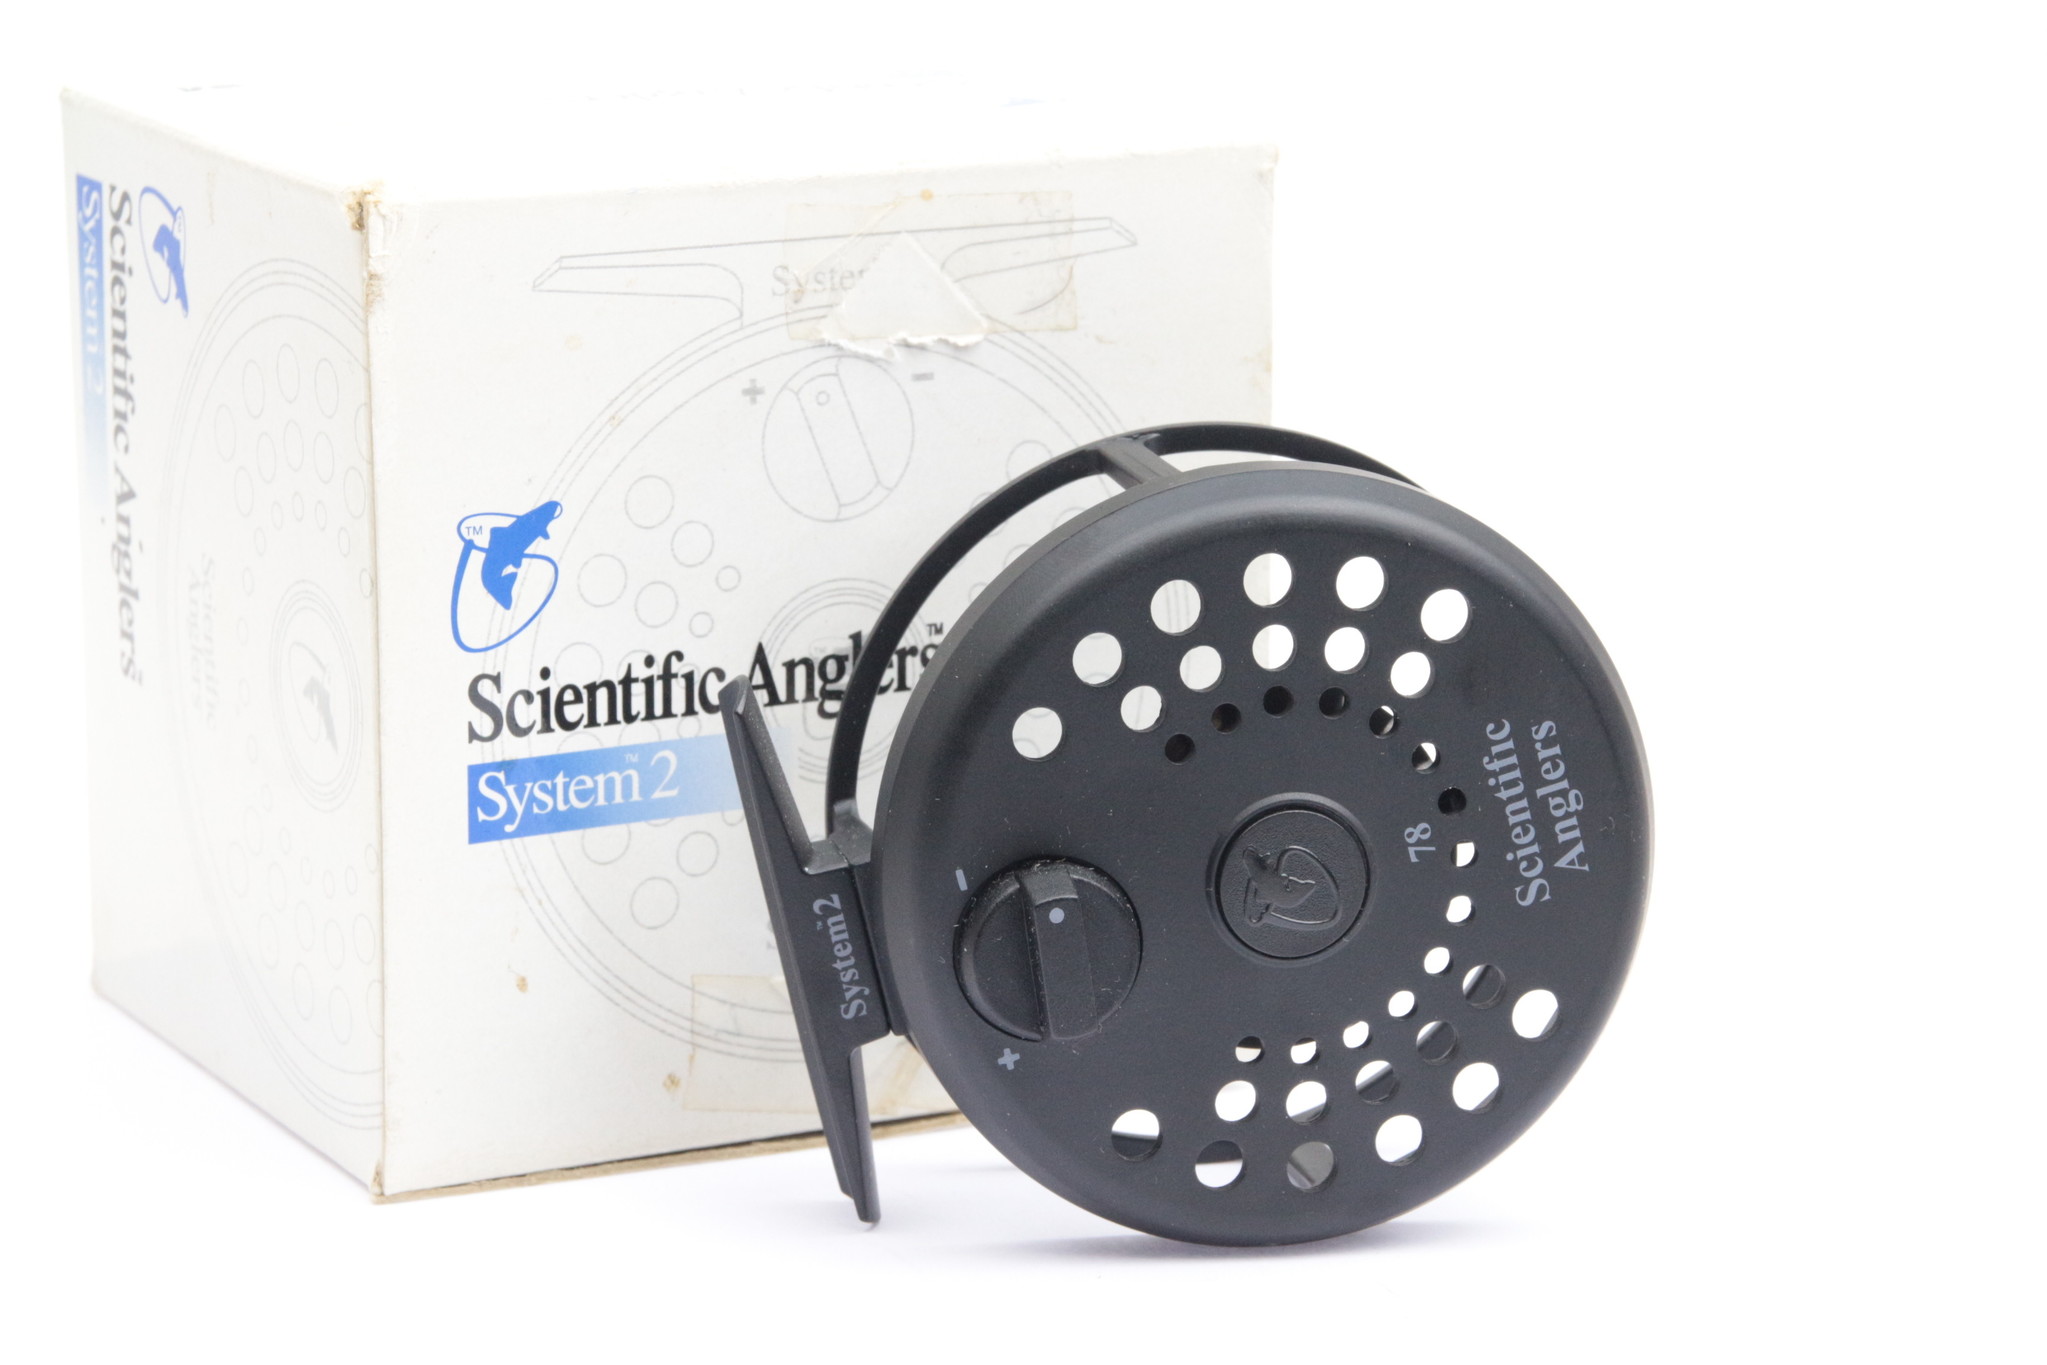 Scientific anglers system 2 78 #7/8